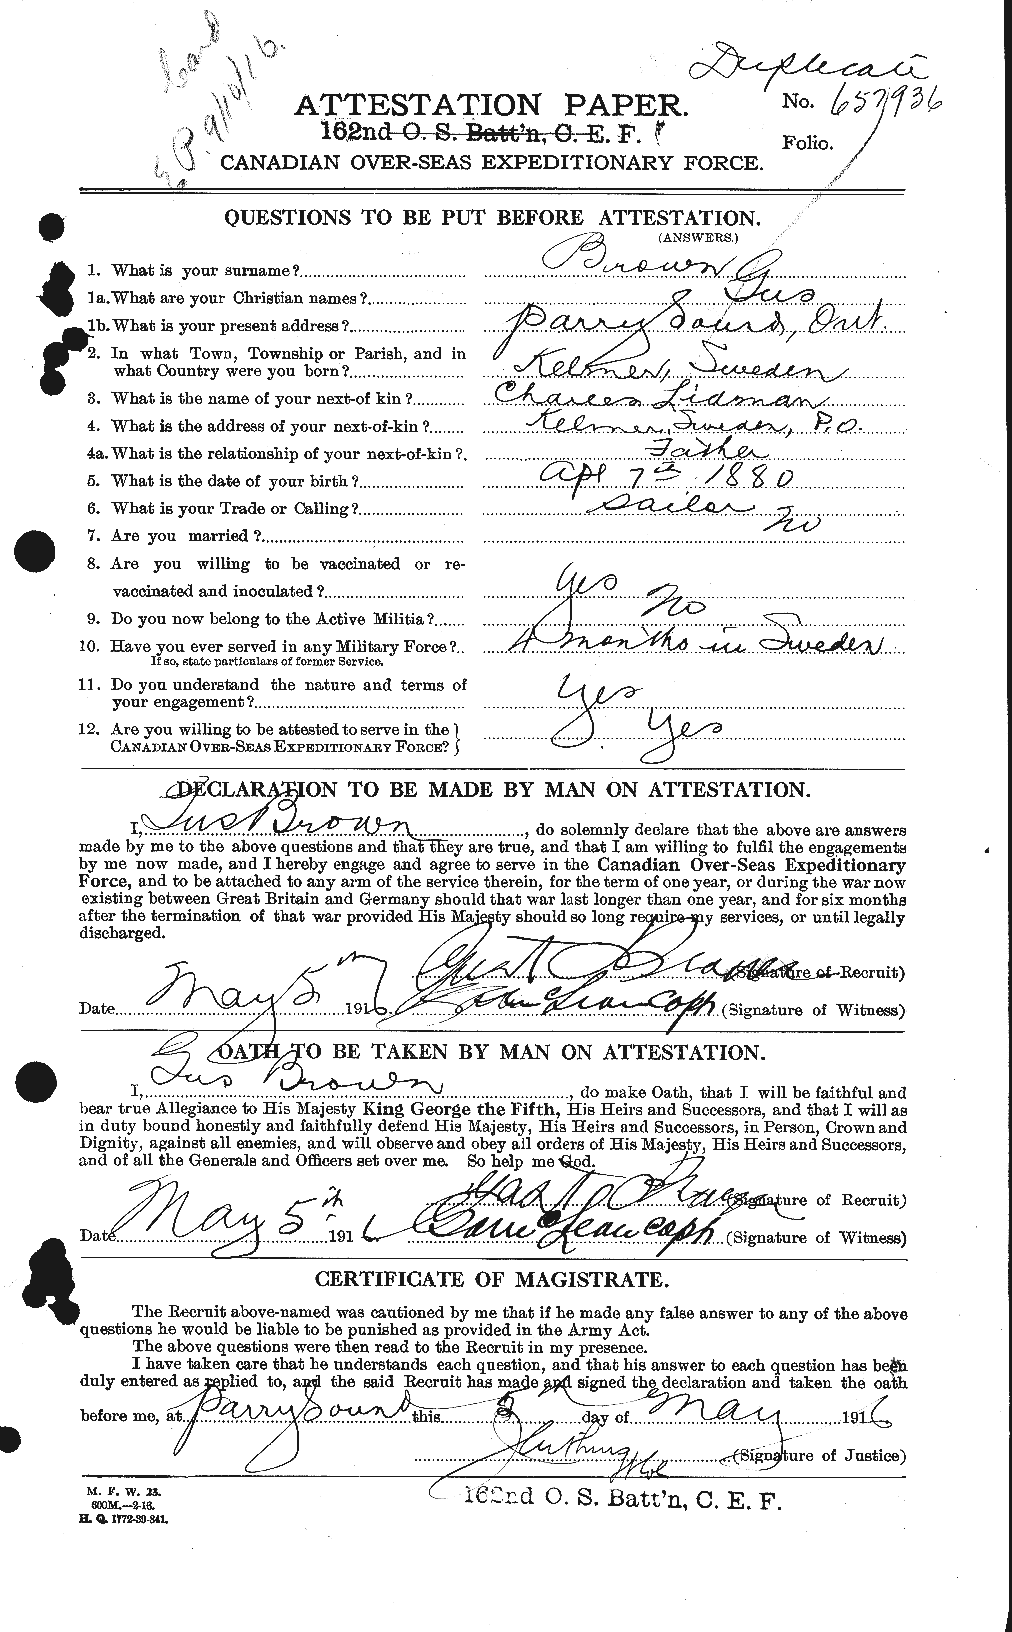 Personnel Records of the First World War - CEF 262651a